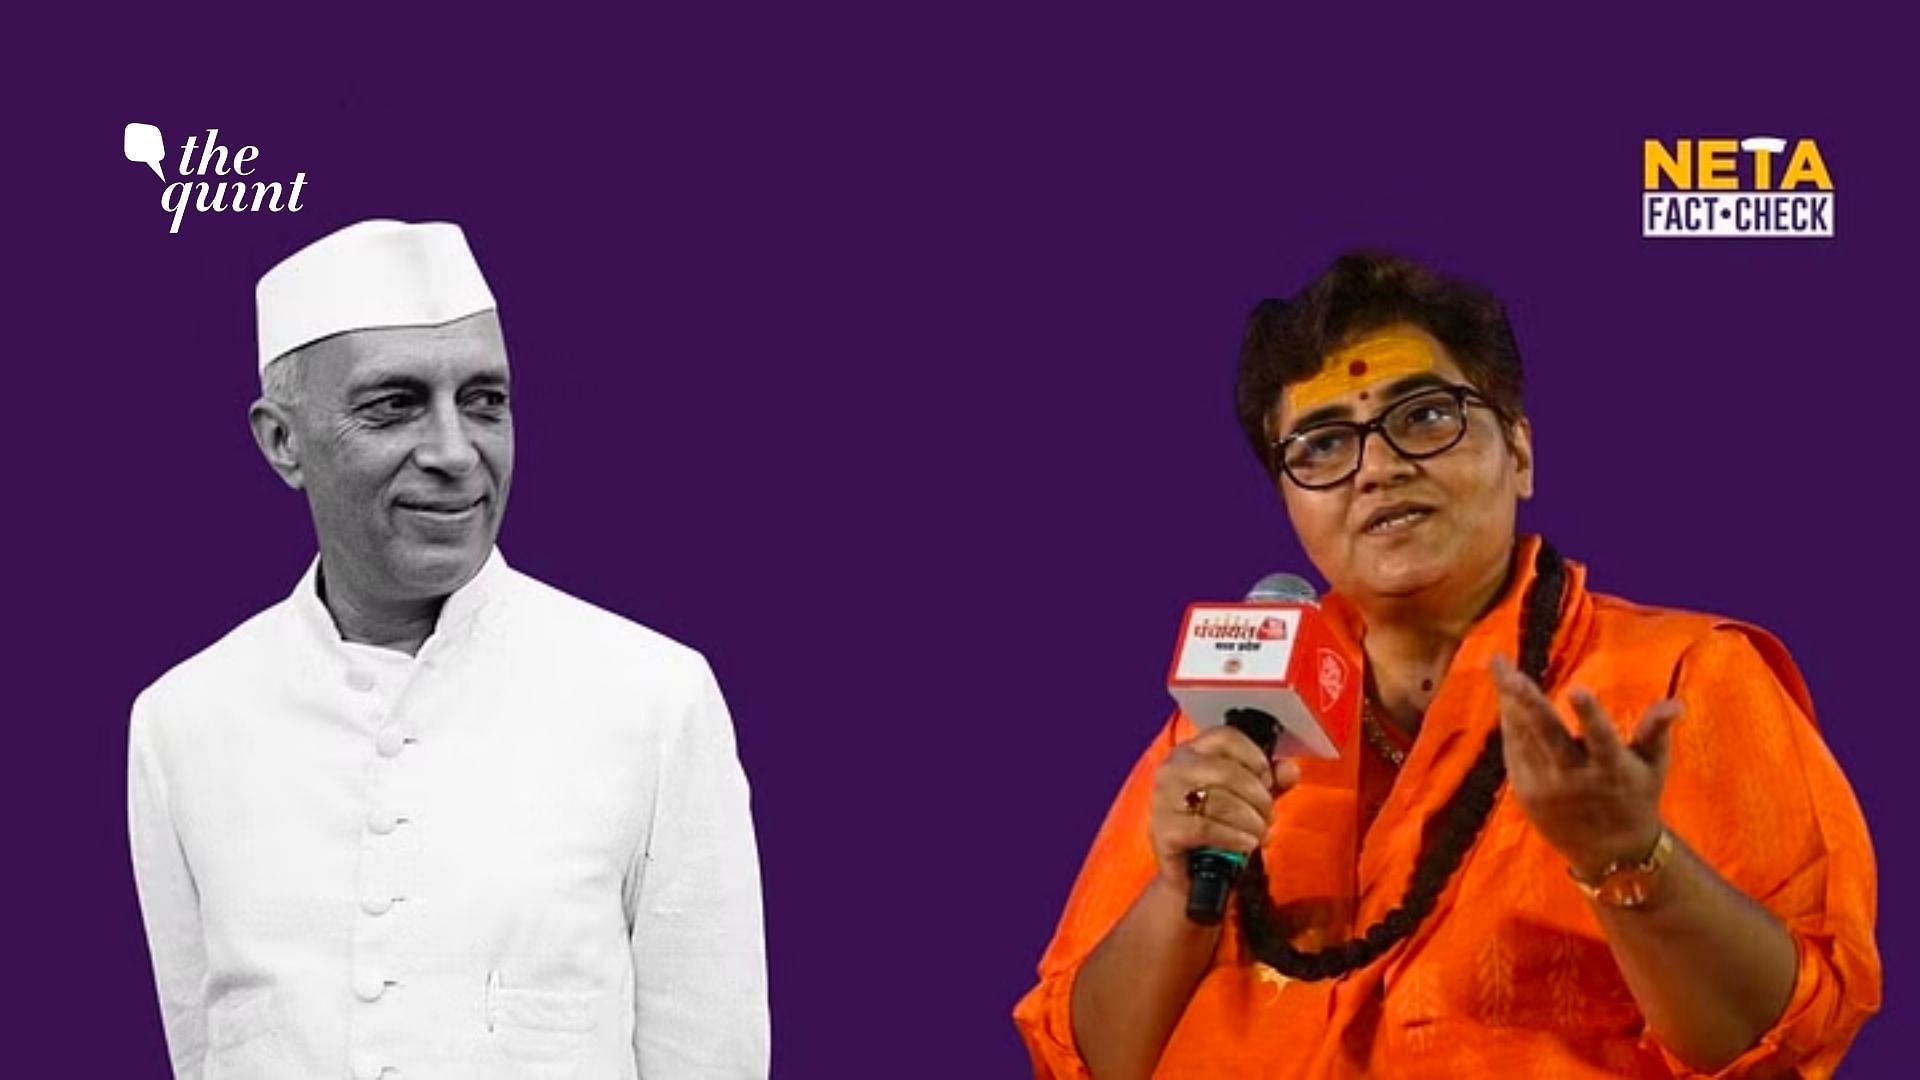 <div class="paragraphs"><p>BJP MP Pragya Thakur made a misleading claim about former PM Jawaharlal Nehru rushing to be the first person to sign the Indian Constitution.</p></div>